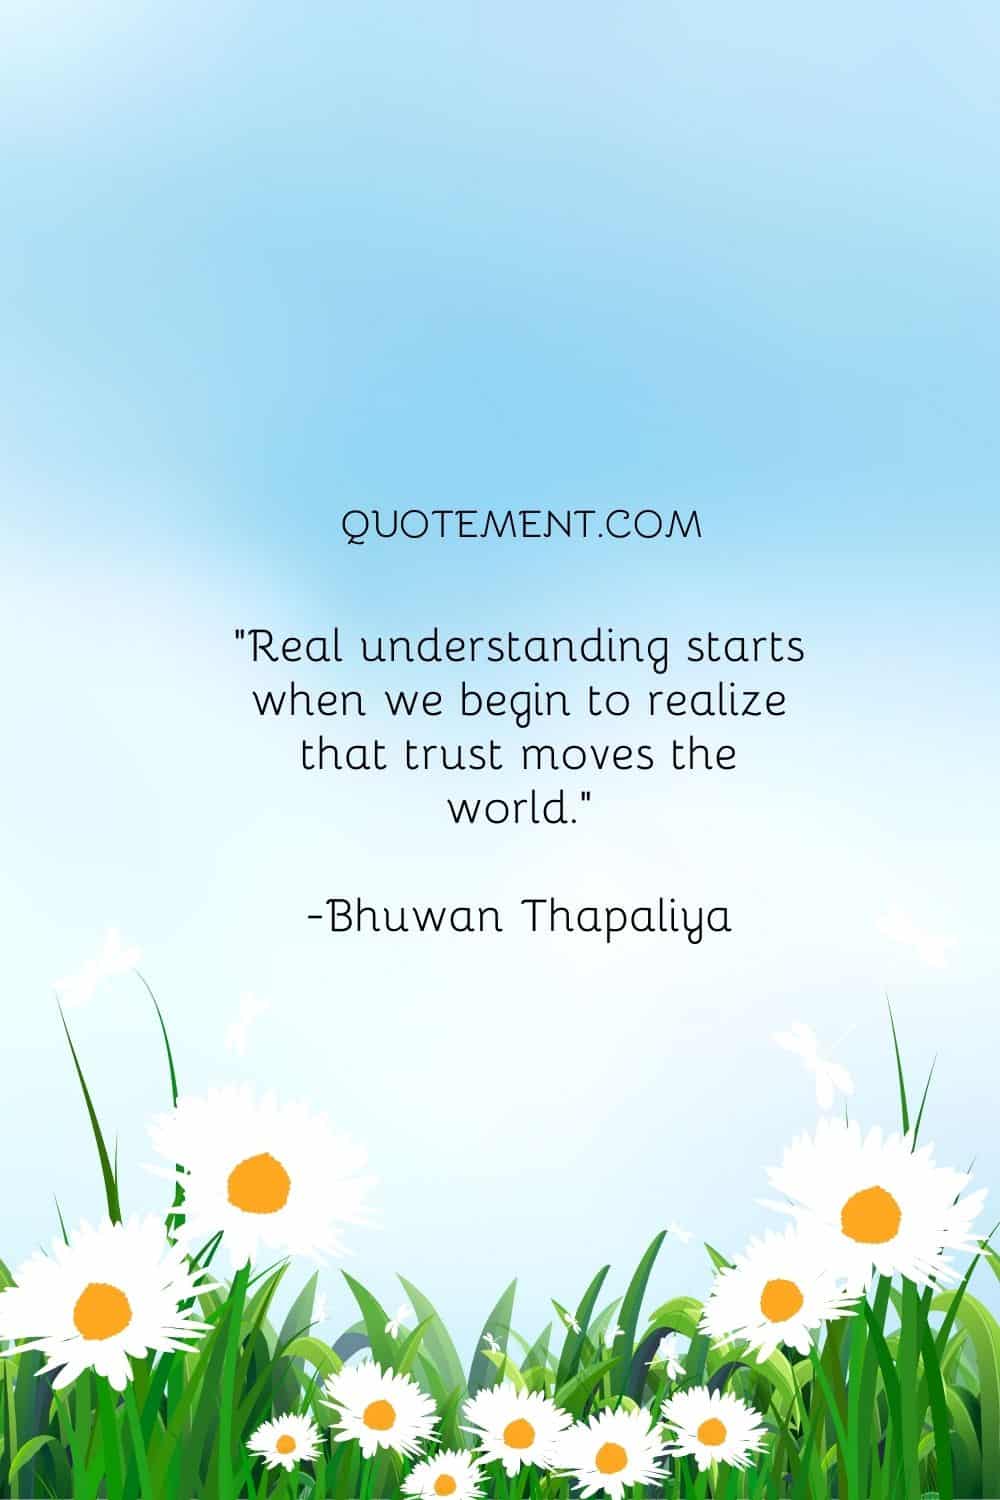 Real understanding starts when we begin to realize that trust moves the world.